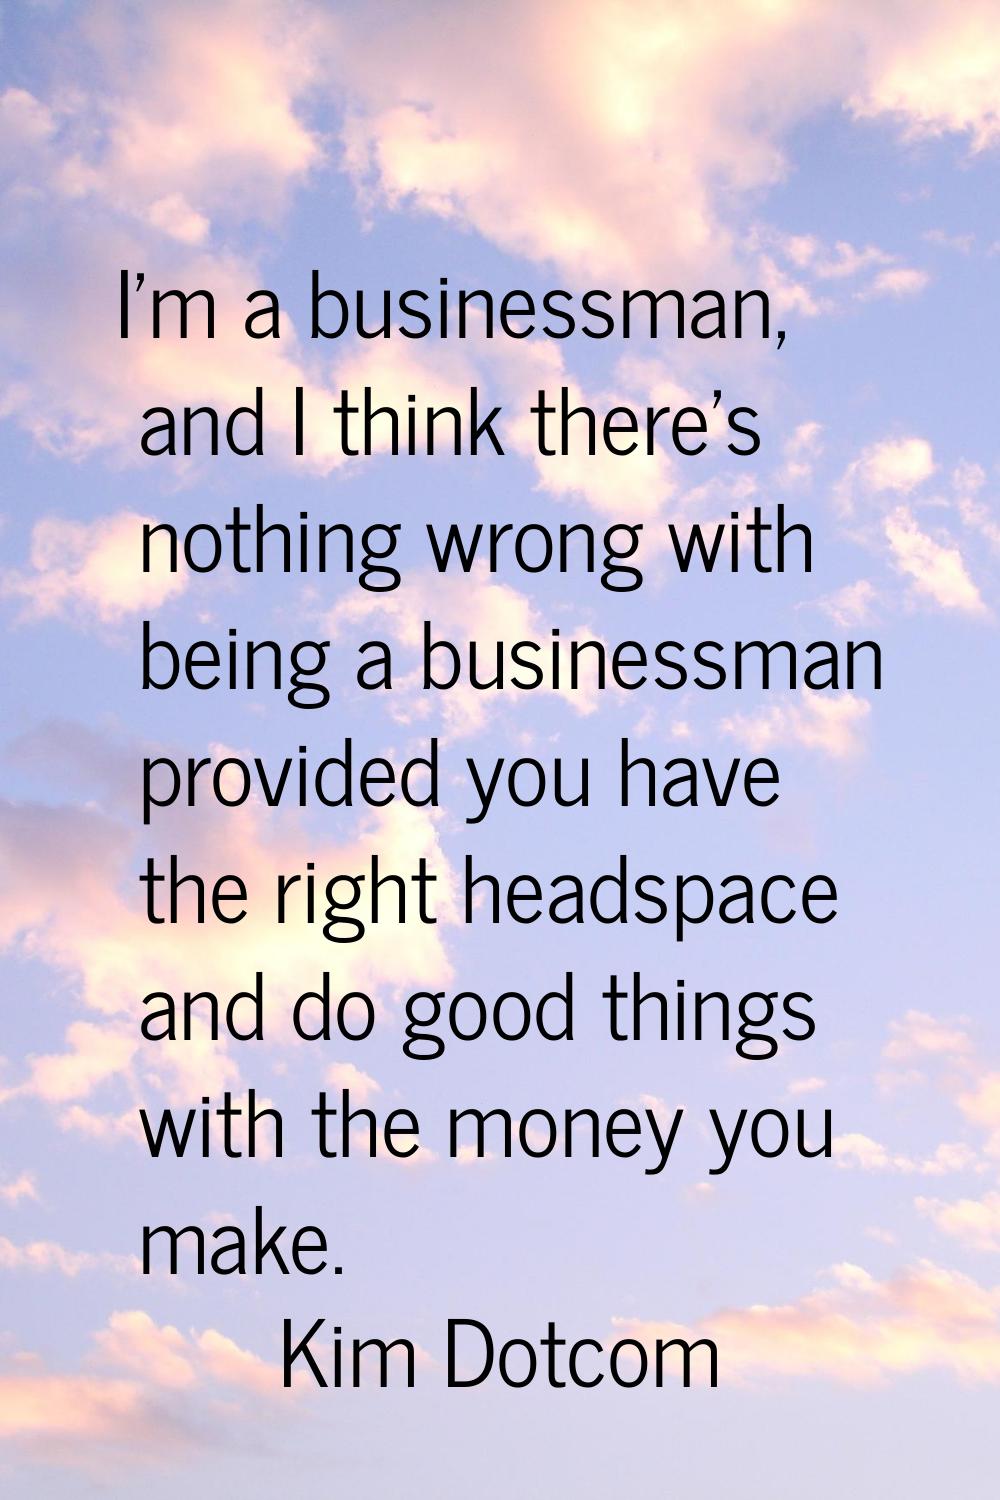 I'm a businessman, and I think there's nothing wrong with being a businessman provided you have the